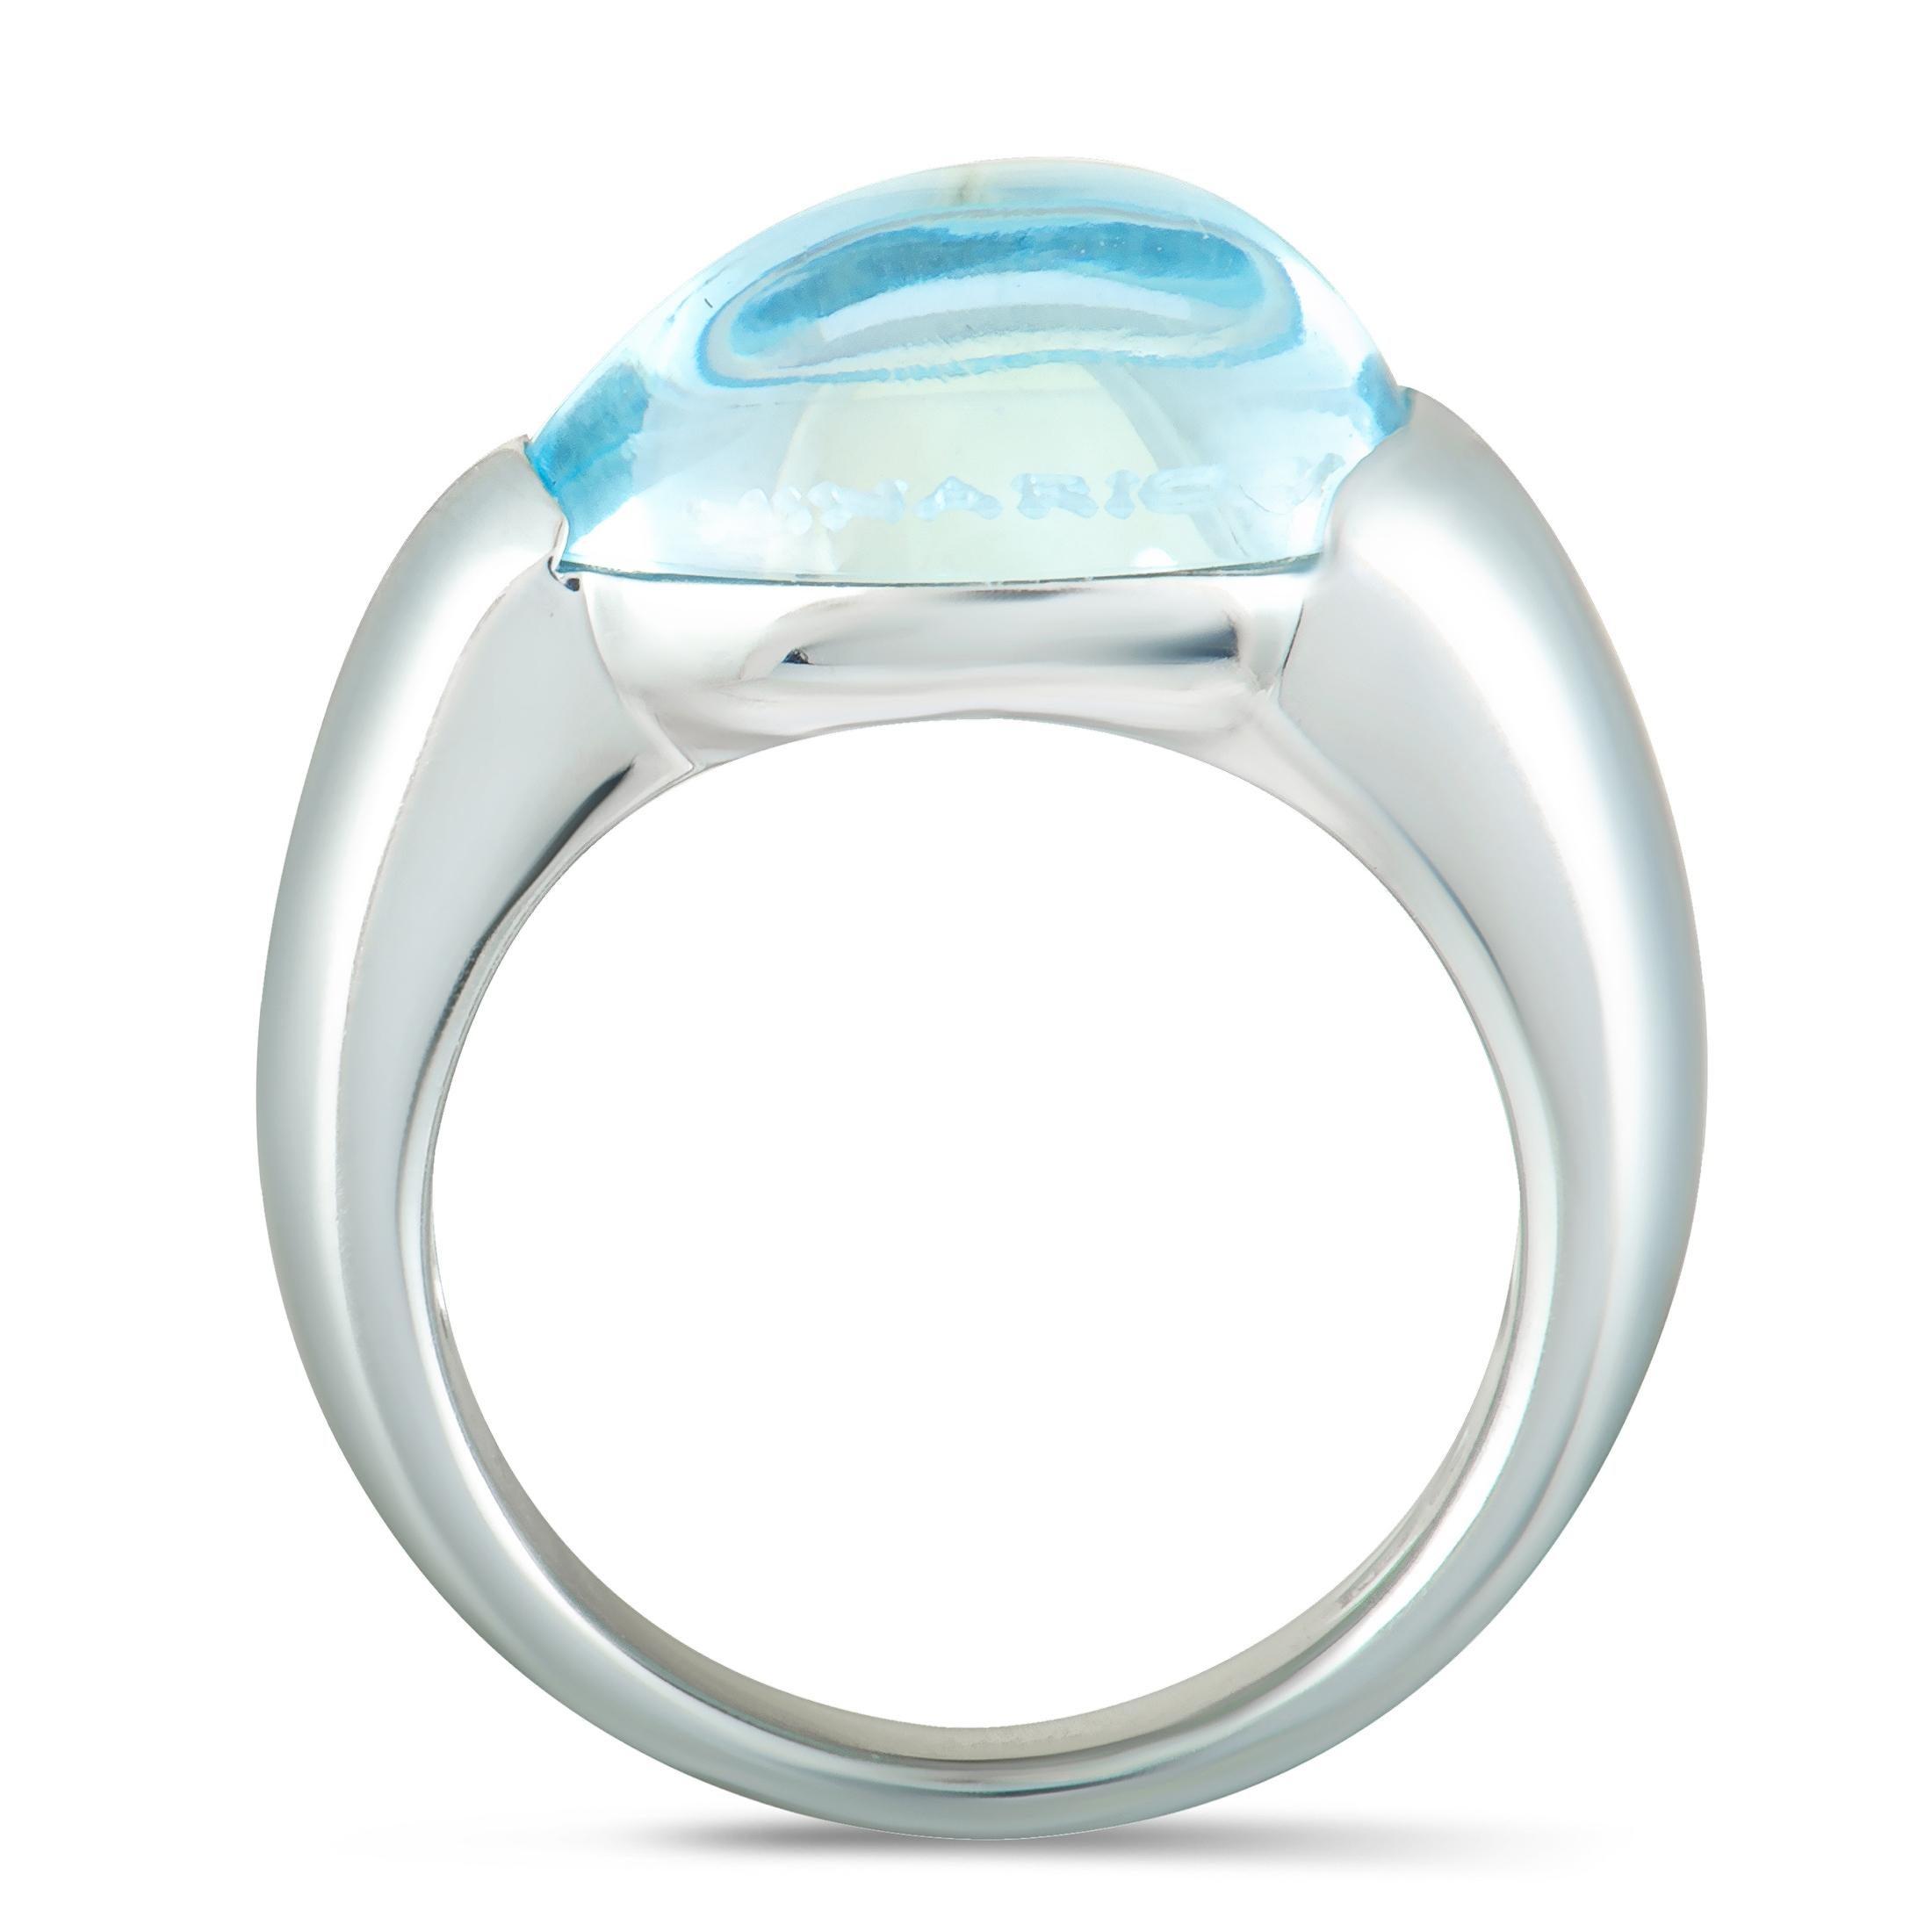 The elegant gleam of 18K white gold and the sublime allure of the expertly cut topaz stone are combined in this fascinating ring designed by Nina Ricci into creating a stunningly prestigious effect. The ring weighs 11.1 grams.
Ring Top Dimensions: